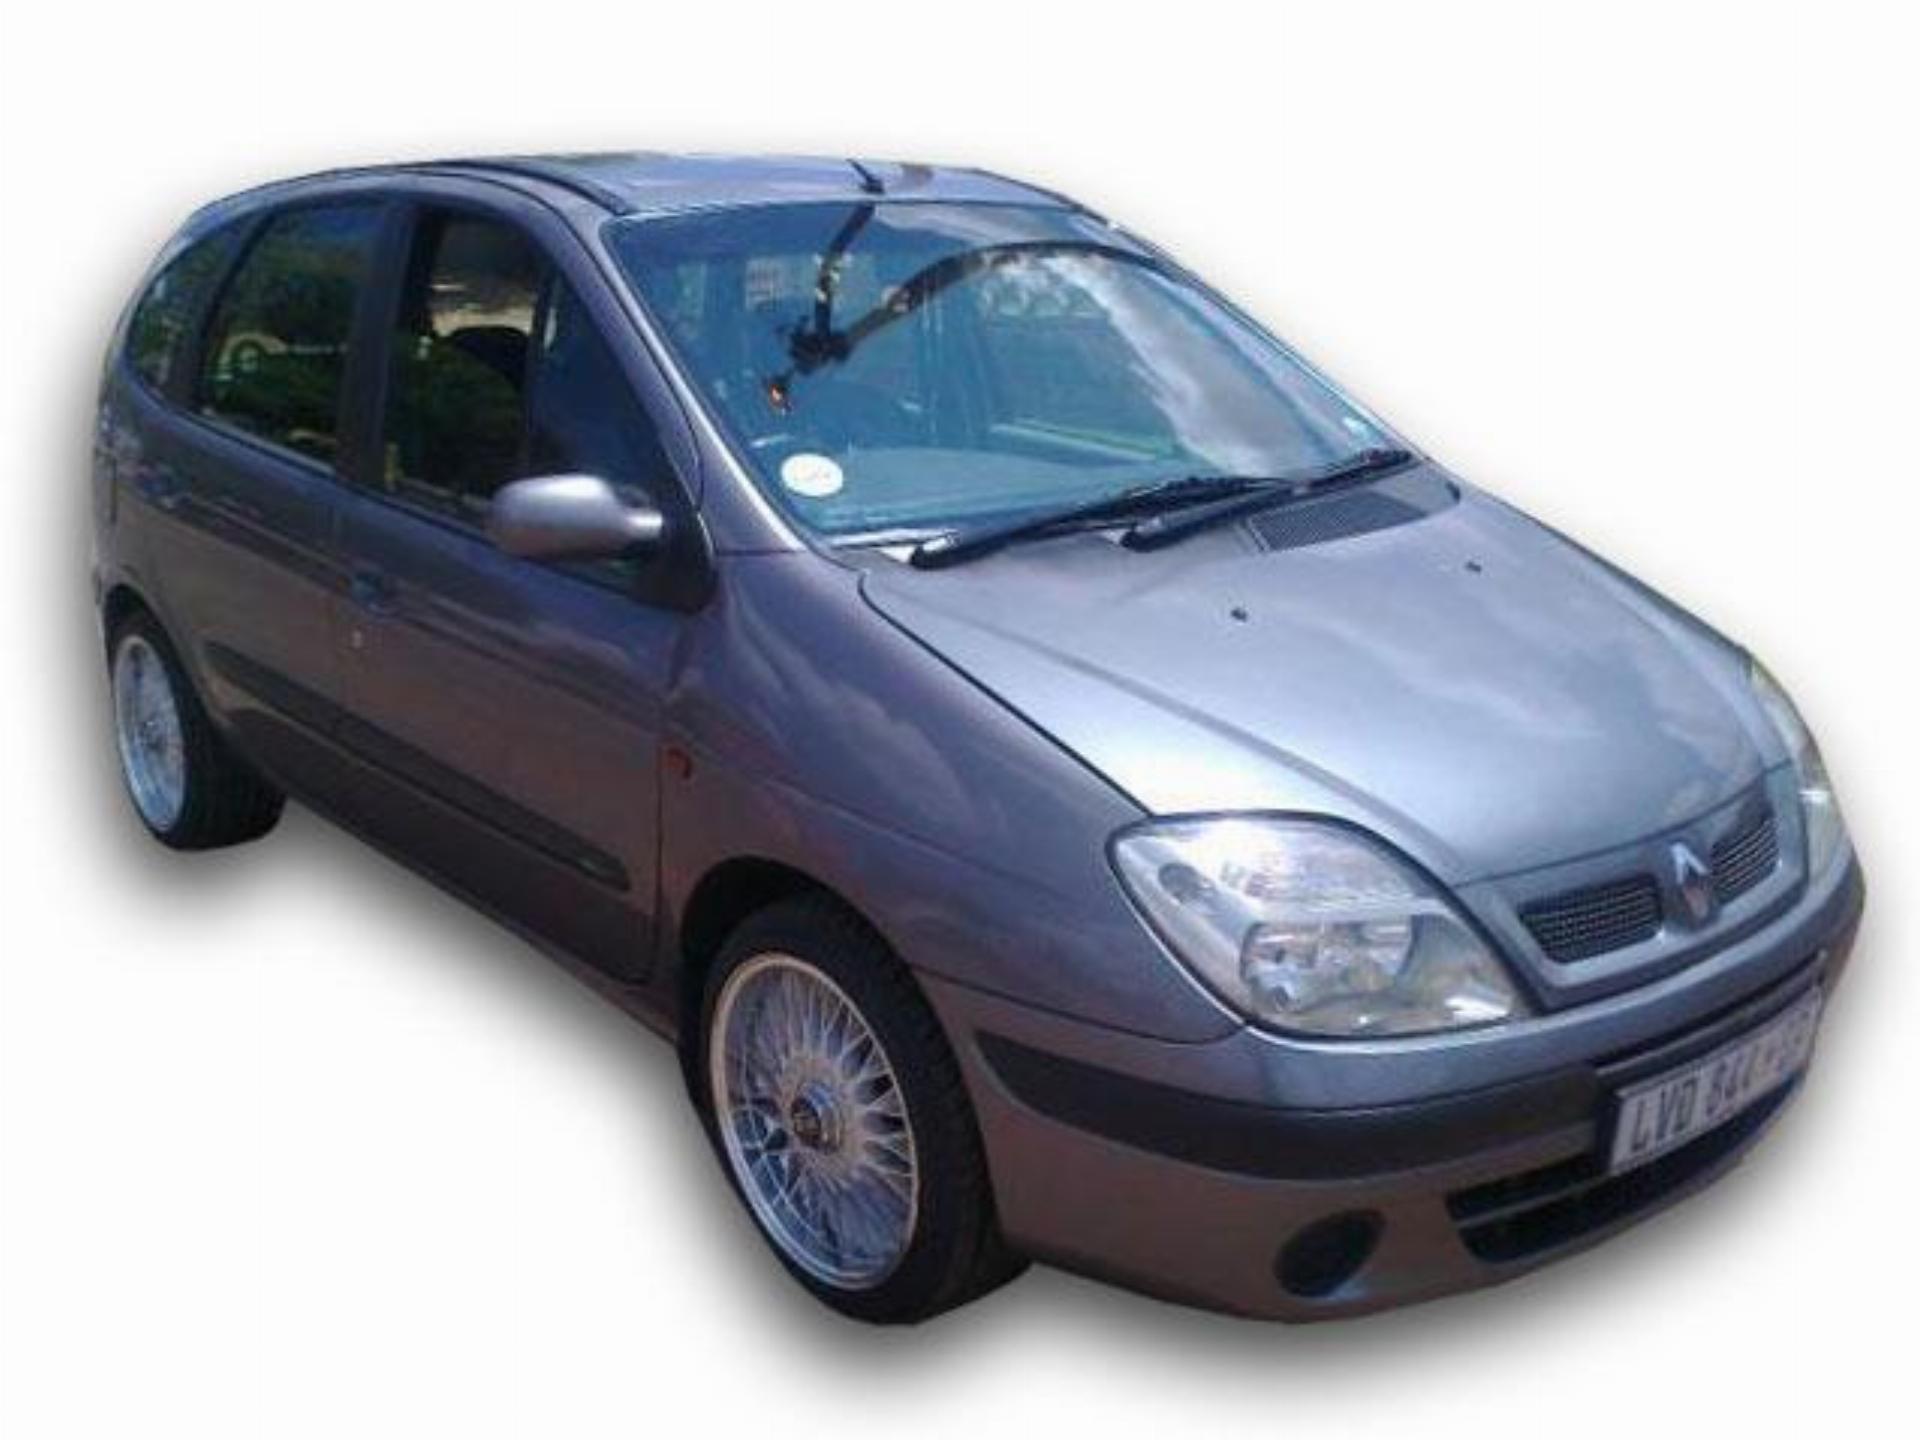 Used Renault Scenic 1.6 2000 on auction PV1001111